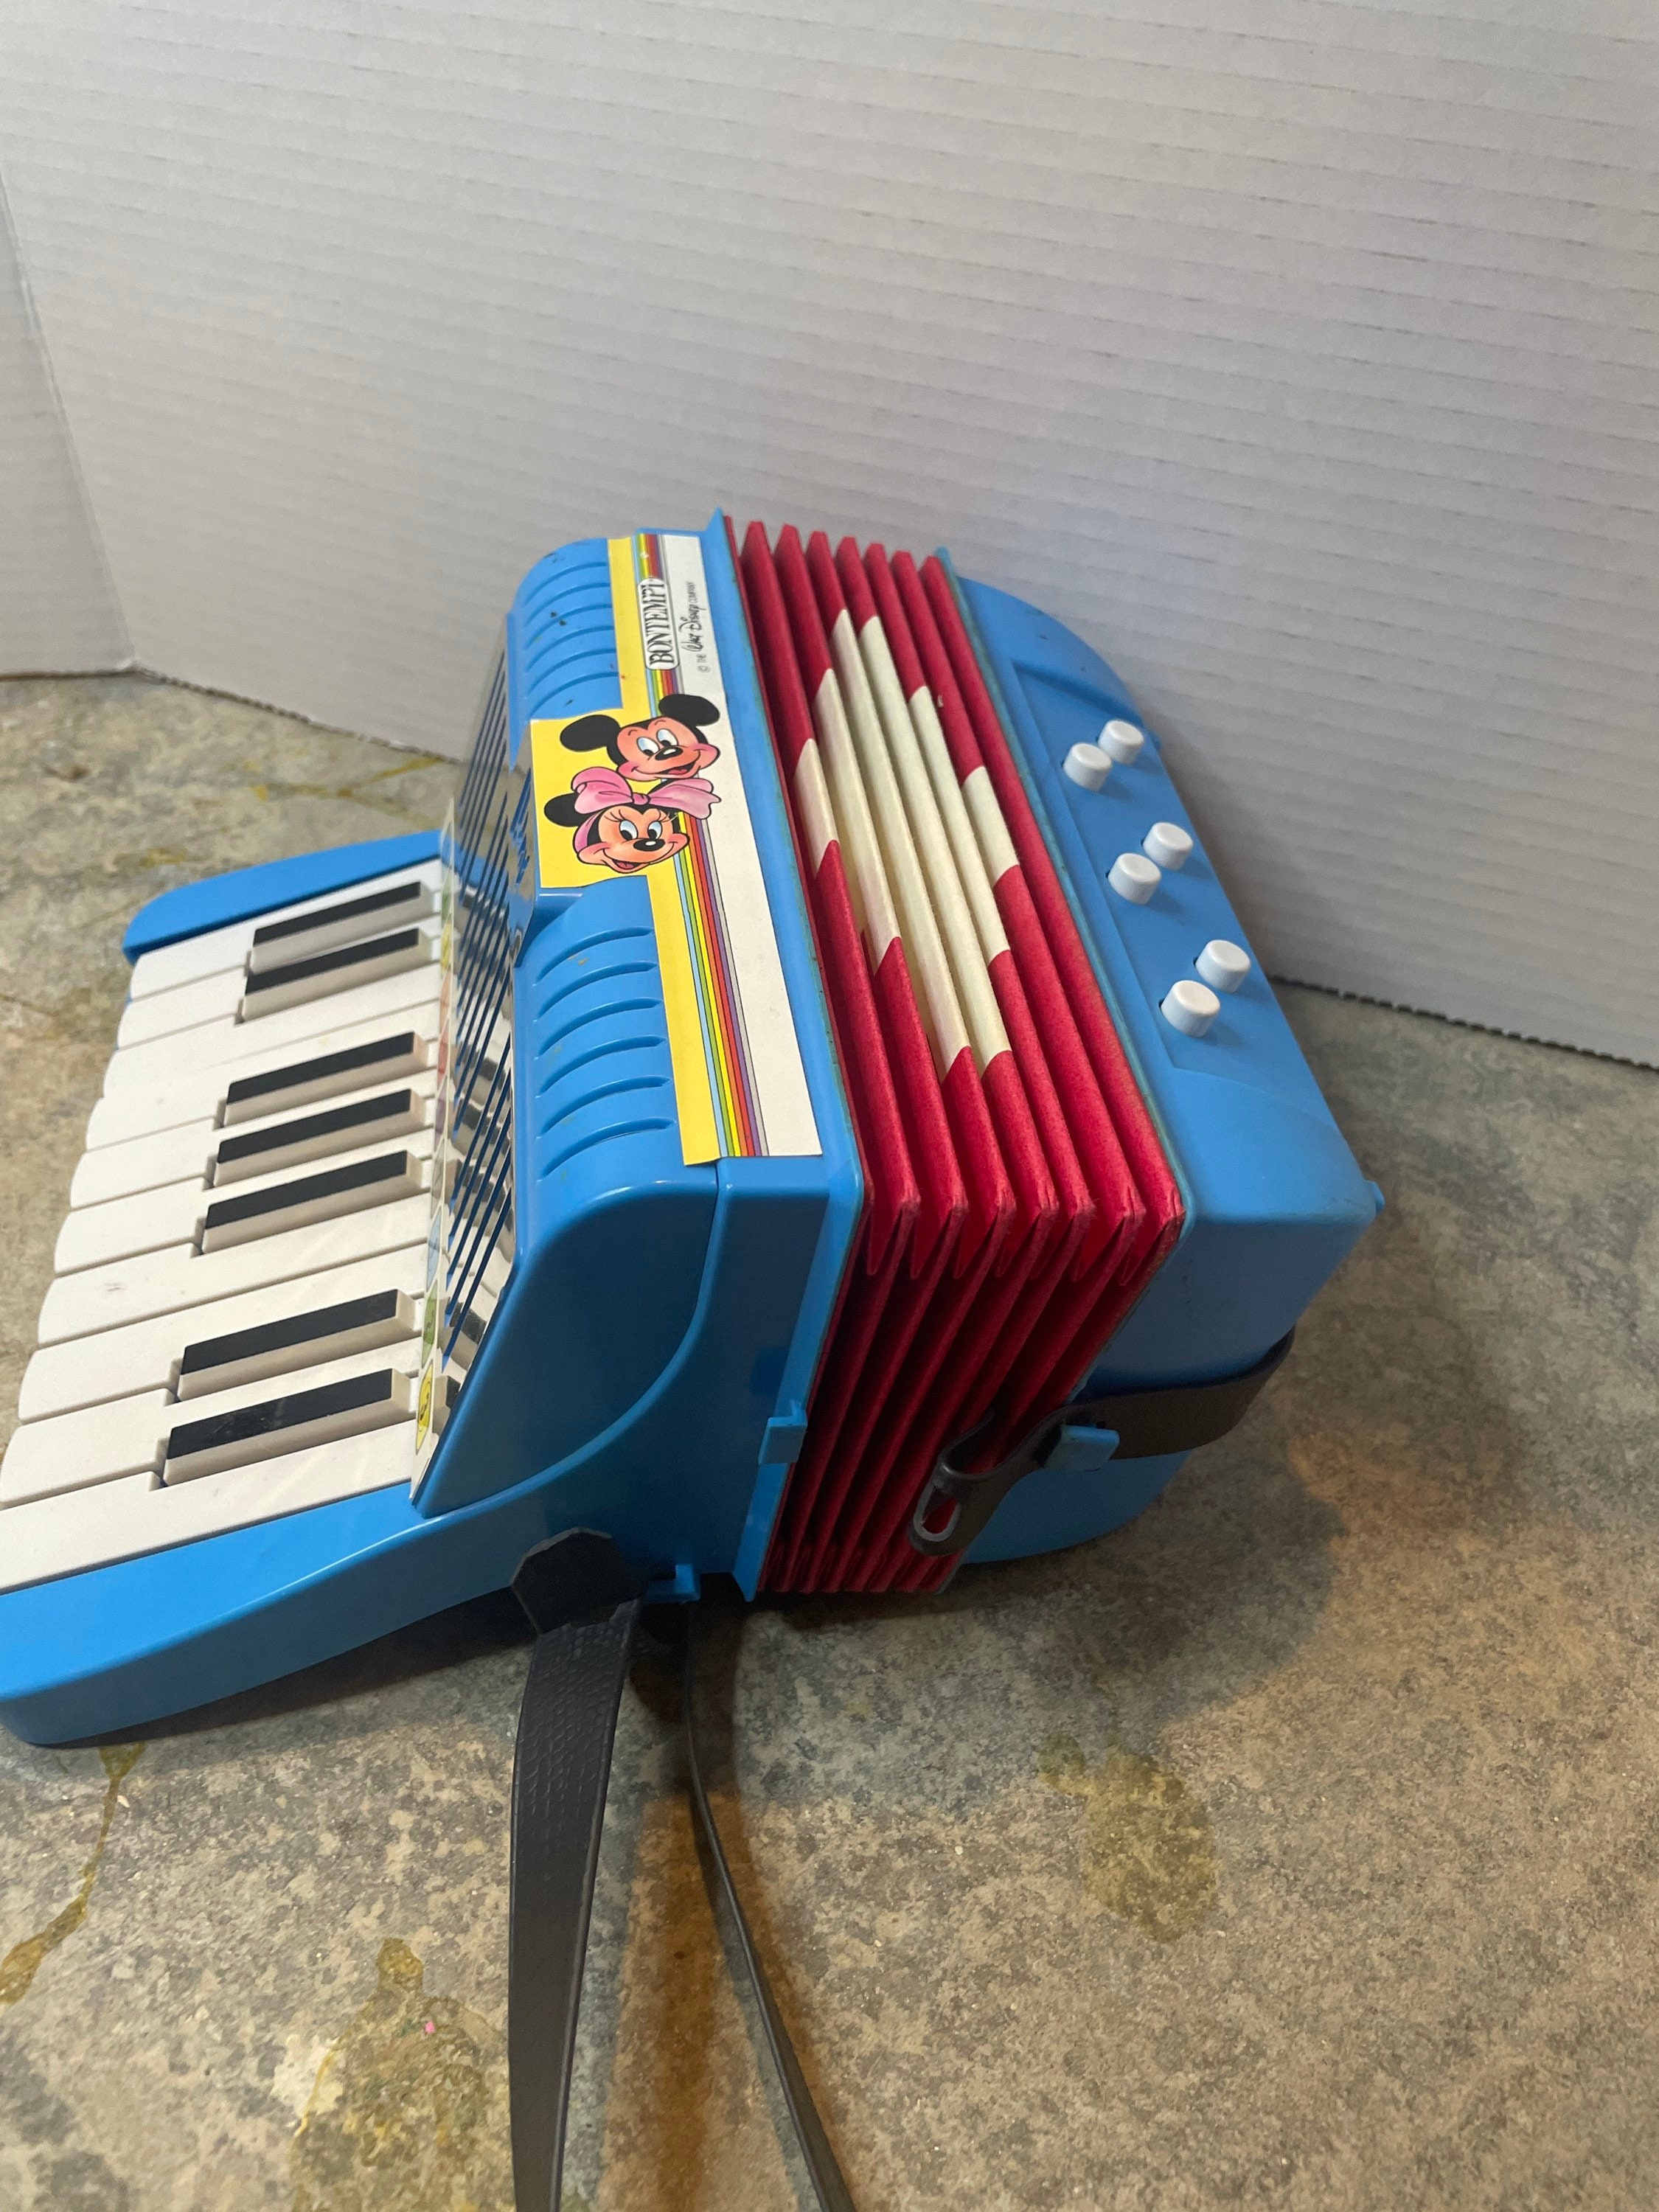 Disney Toy Accordion From the 80s 